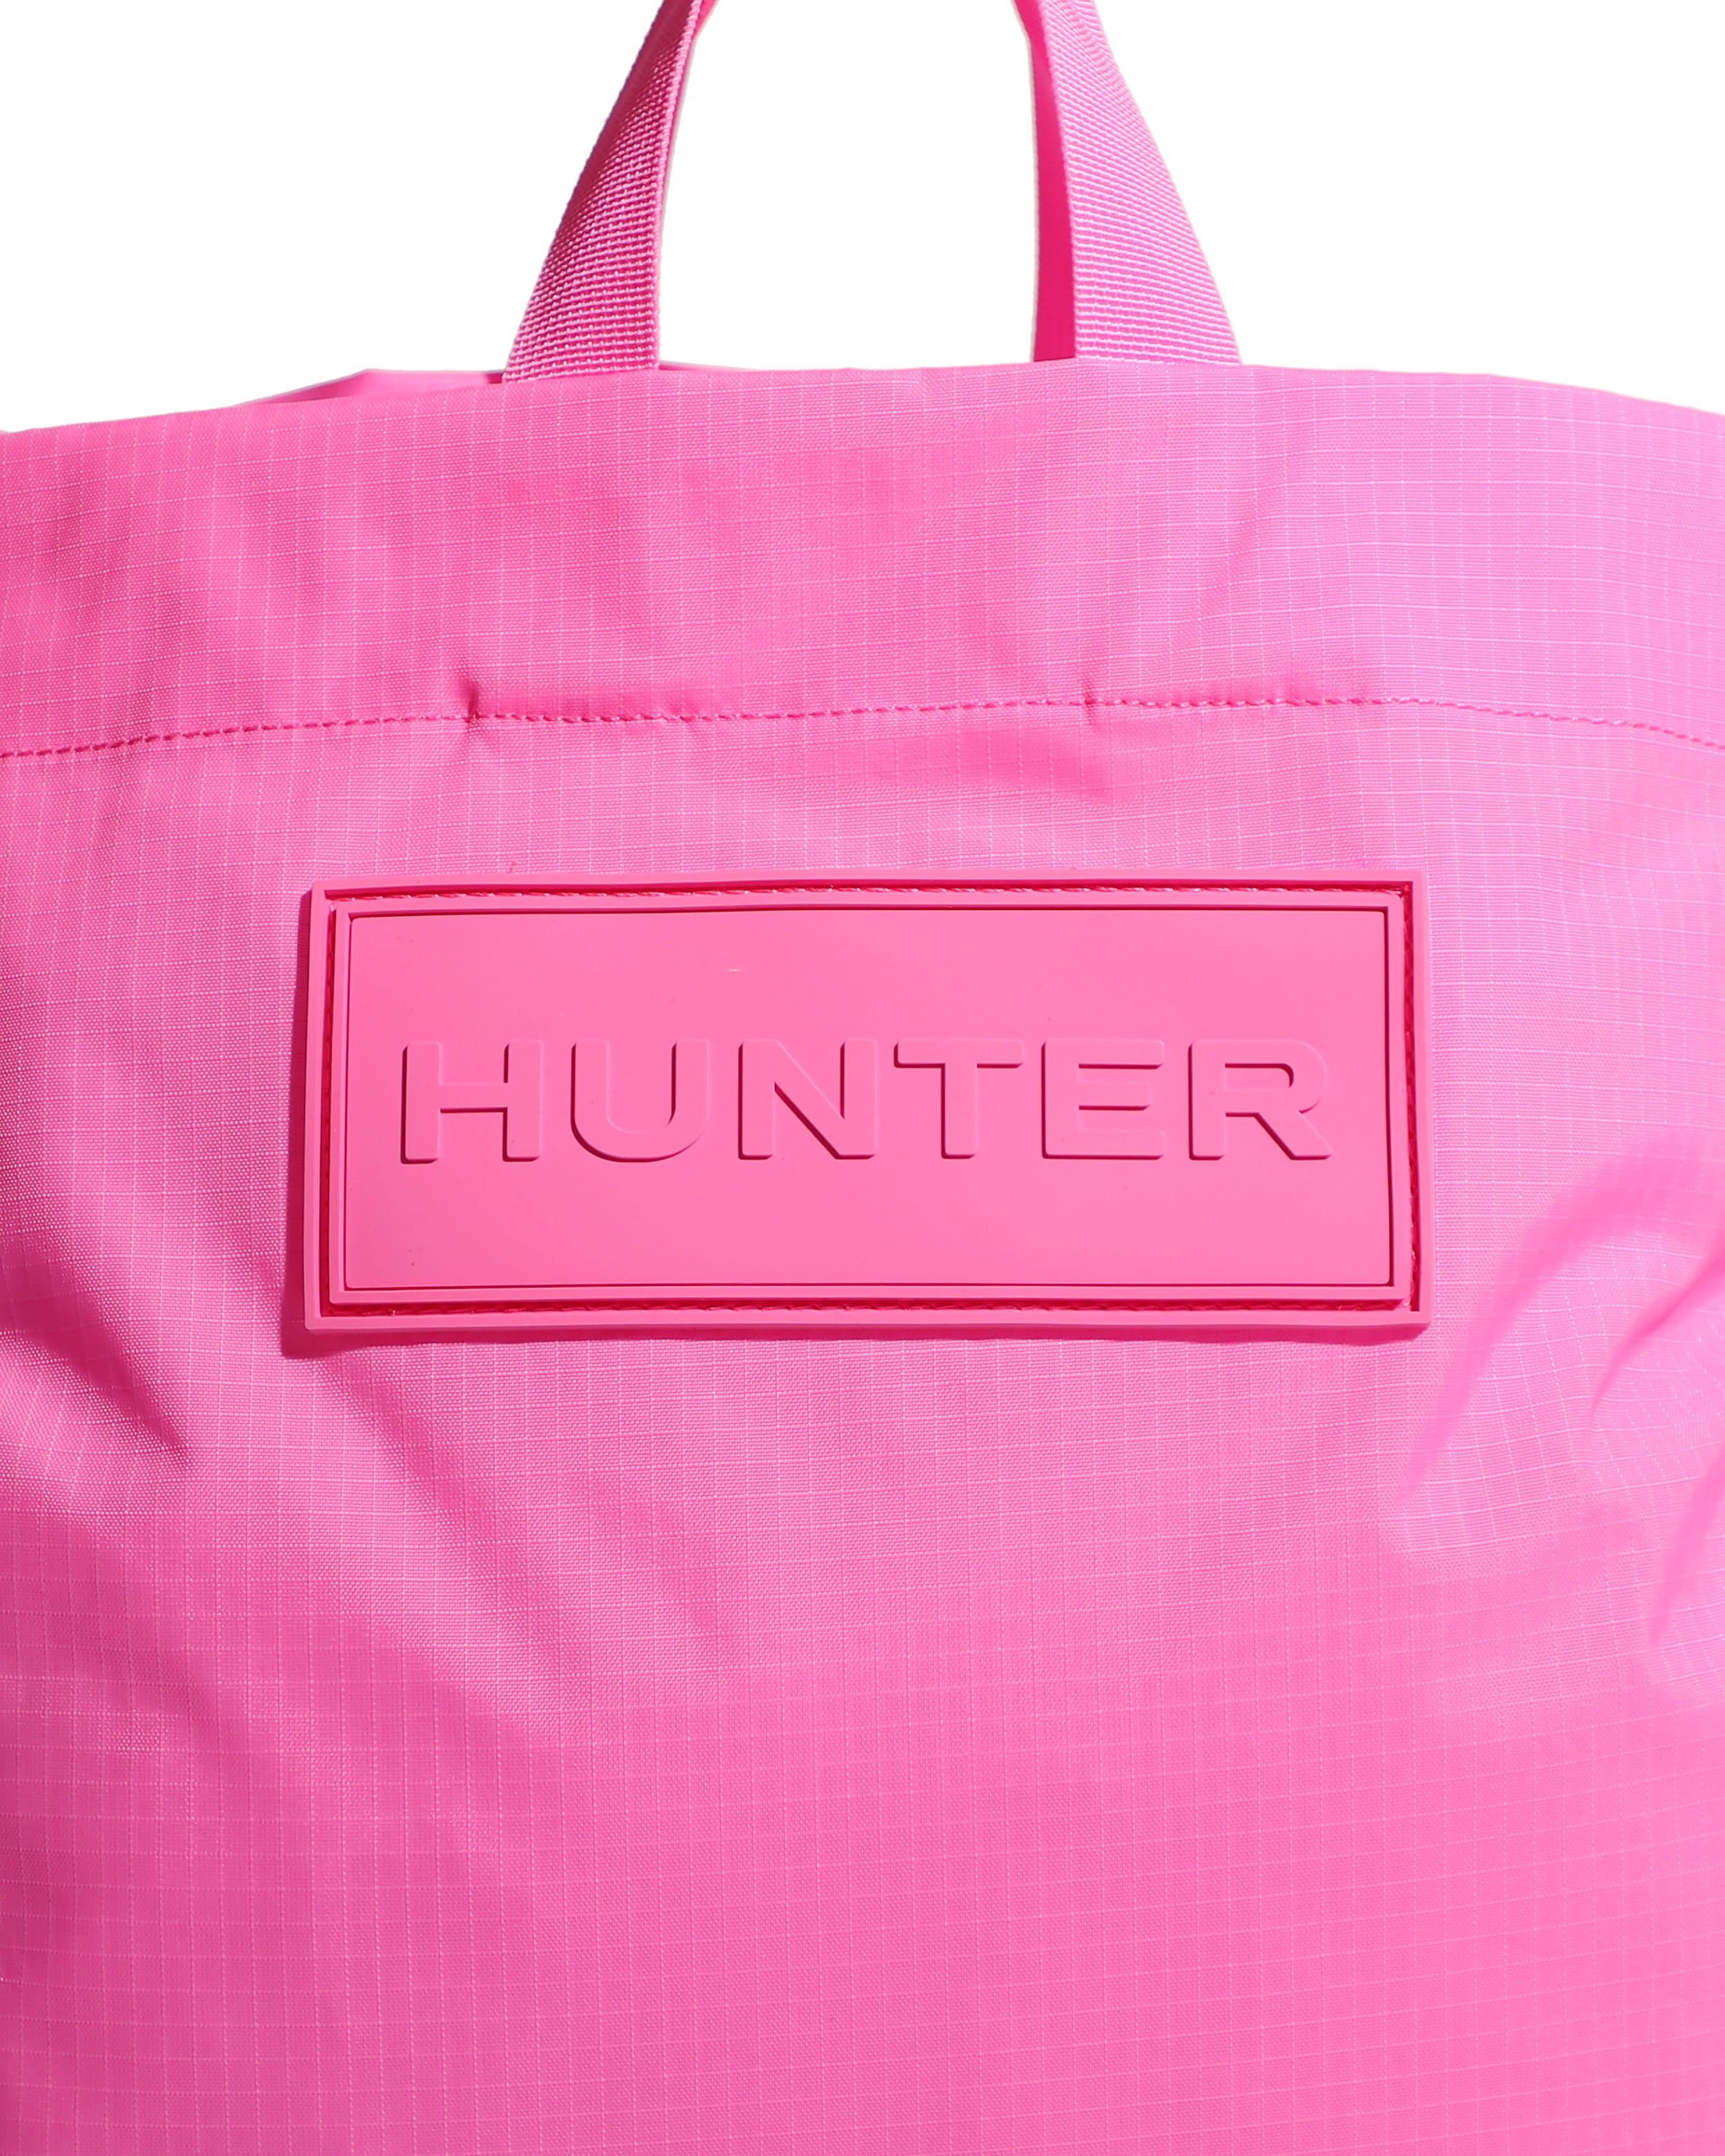 Travel Ripstop Recycled Nylon Tote Bag - Highlighter Pink